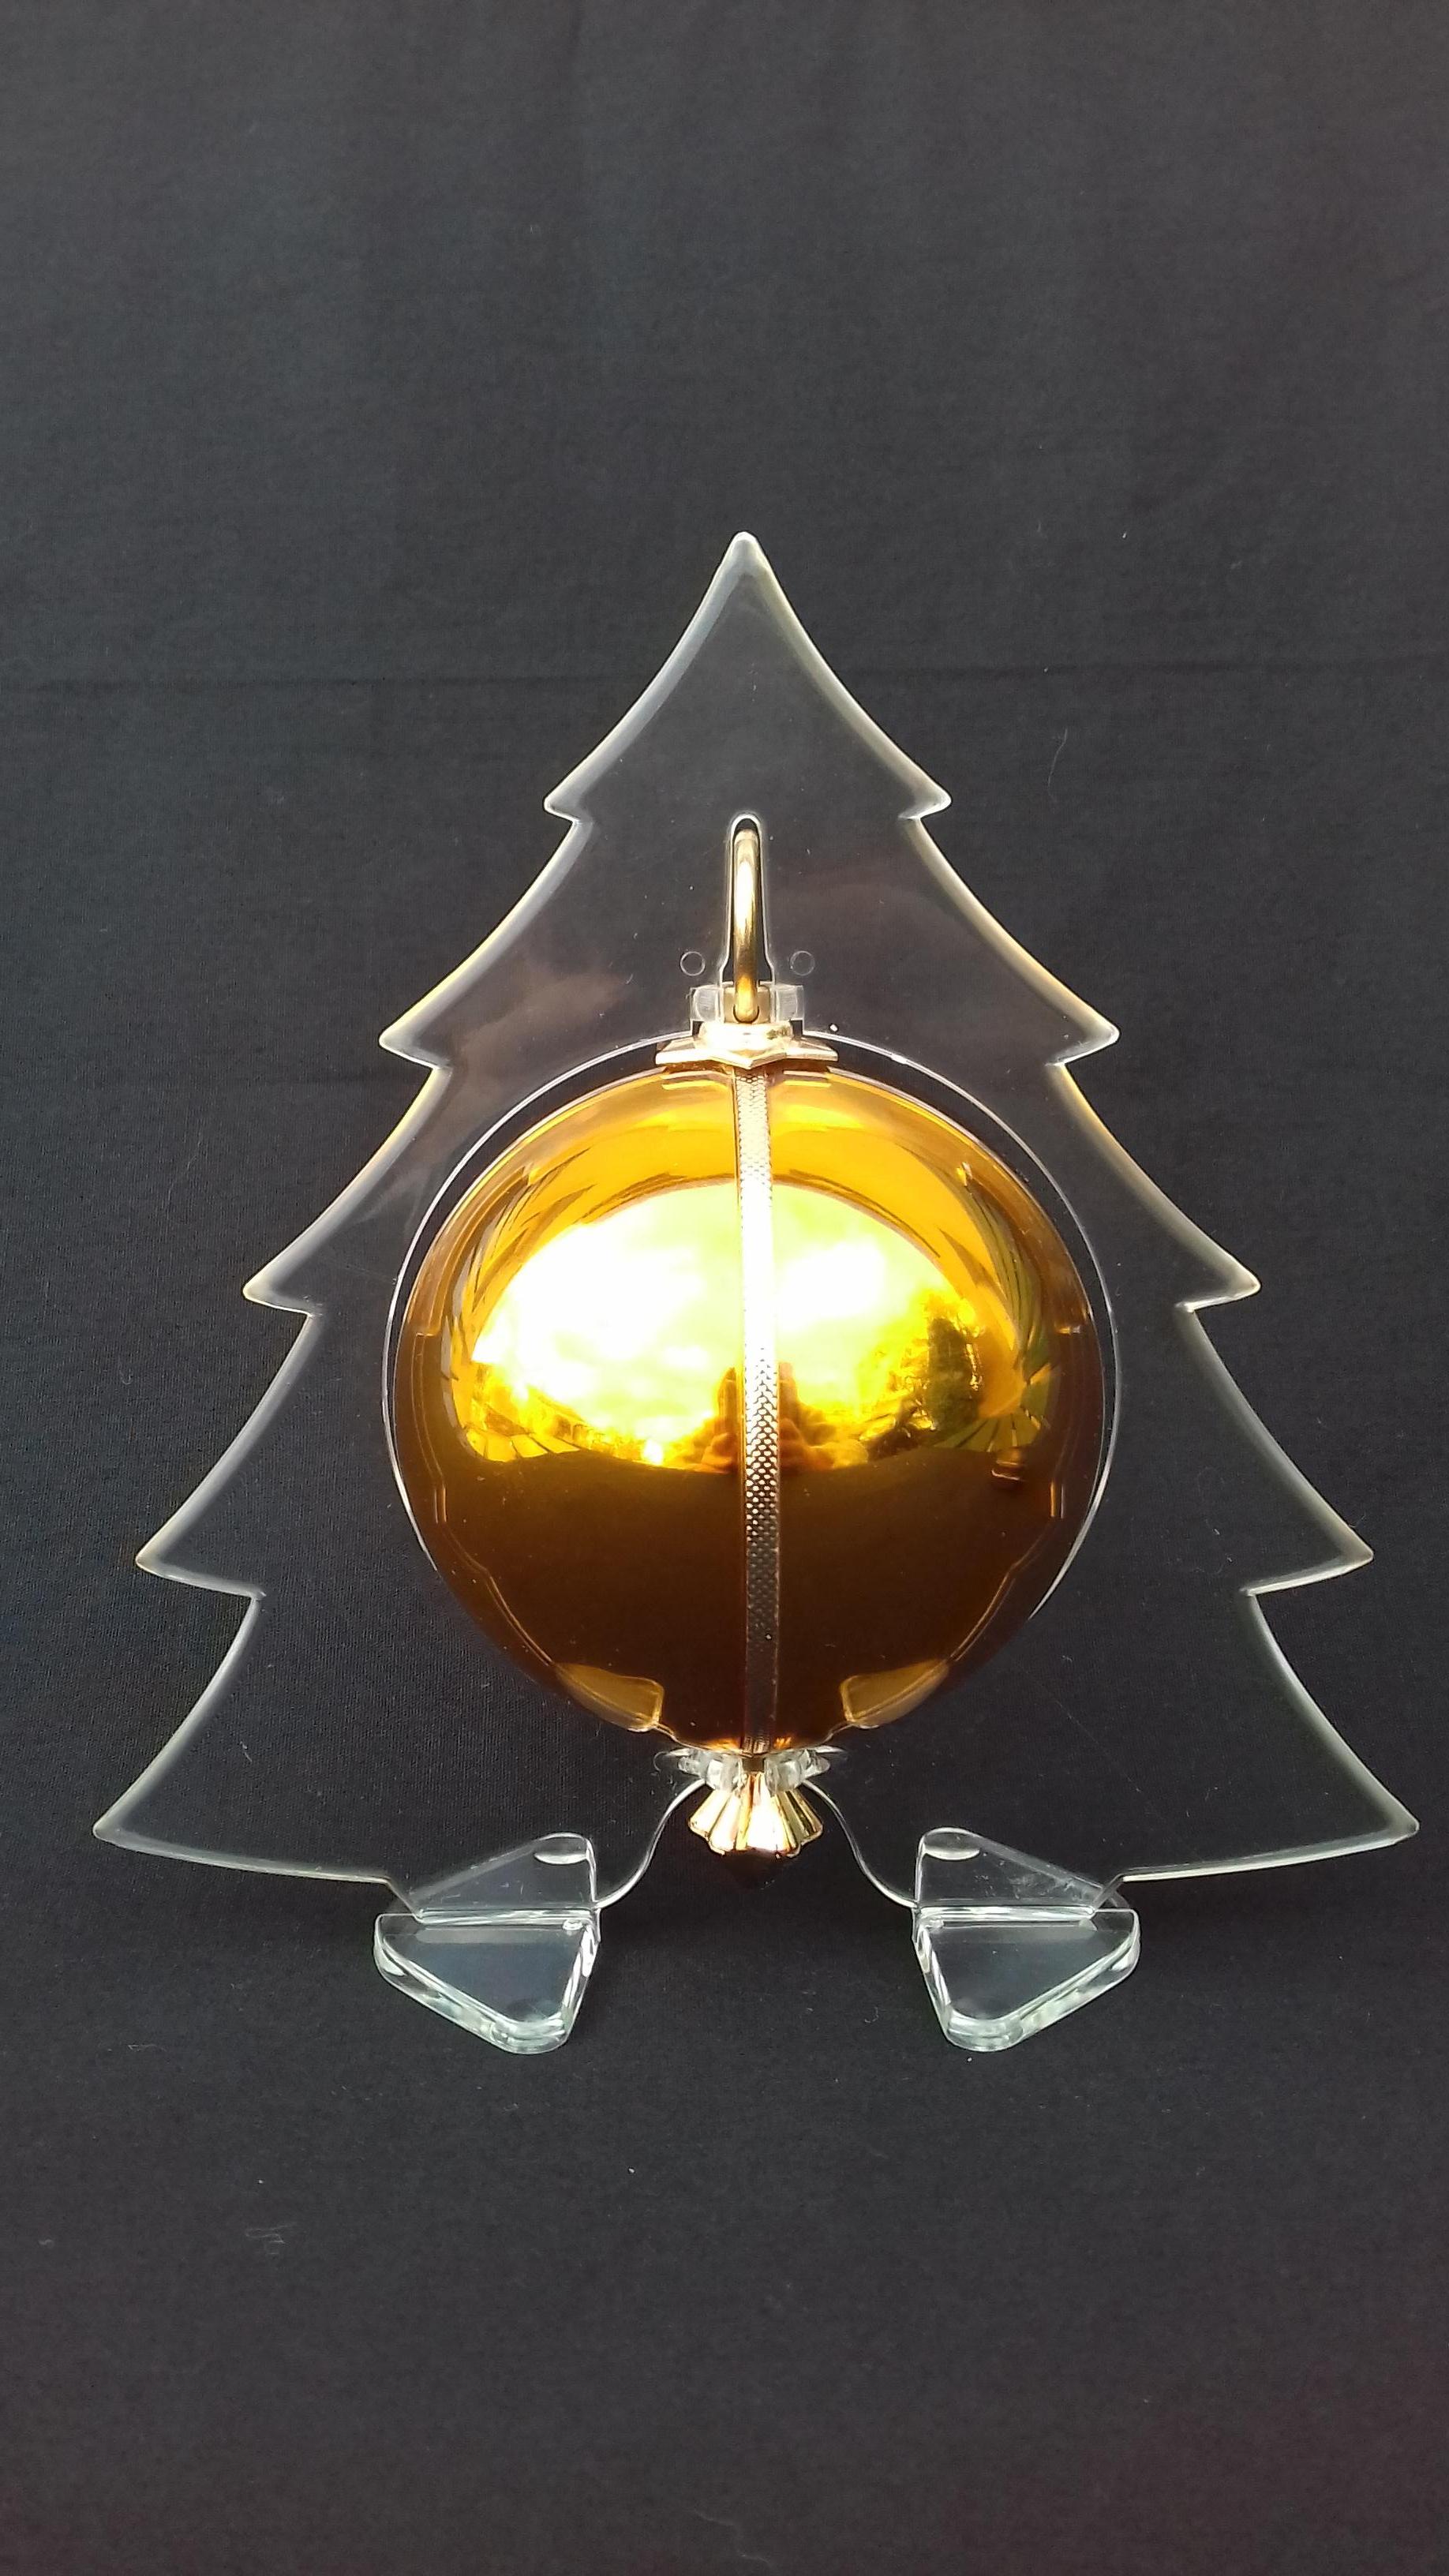 Pull the string, put the tree on your table, and listen to the magic of Christmas

Rare and Gorgeous Christmas Ball Music Box 

Pull the hook, a string will come out and go into the ball playing 